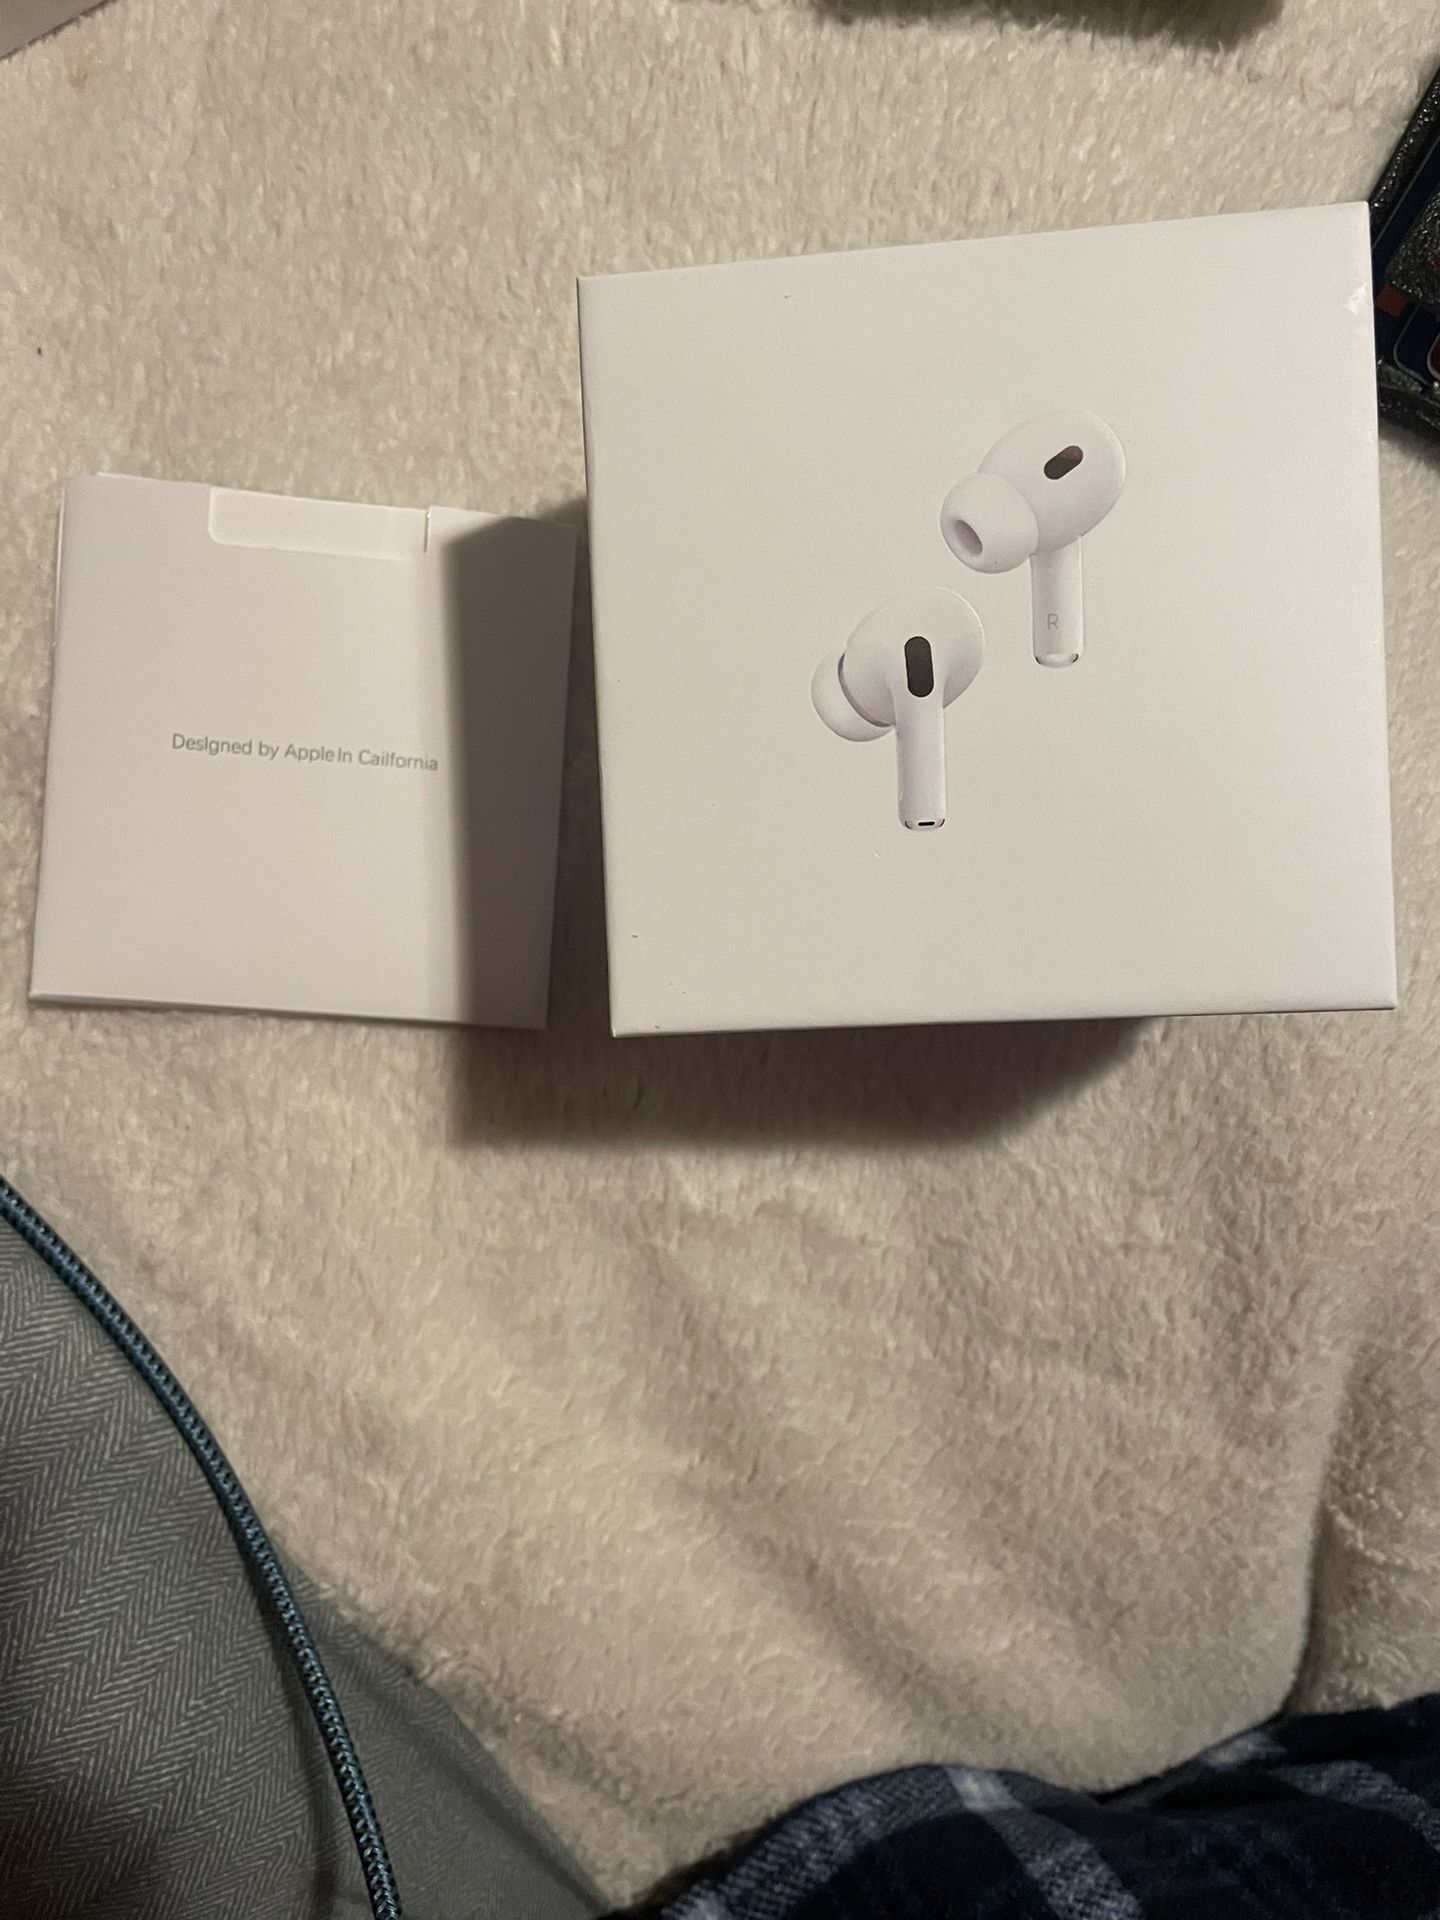 Apple AirPods Pro2 Gen  Box and Charging Case -NO EARPHONES iNCLUDED